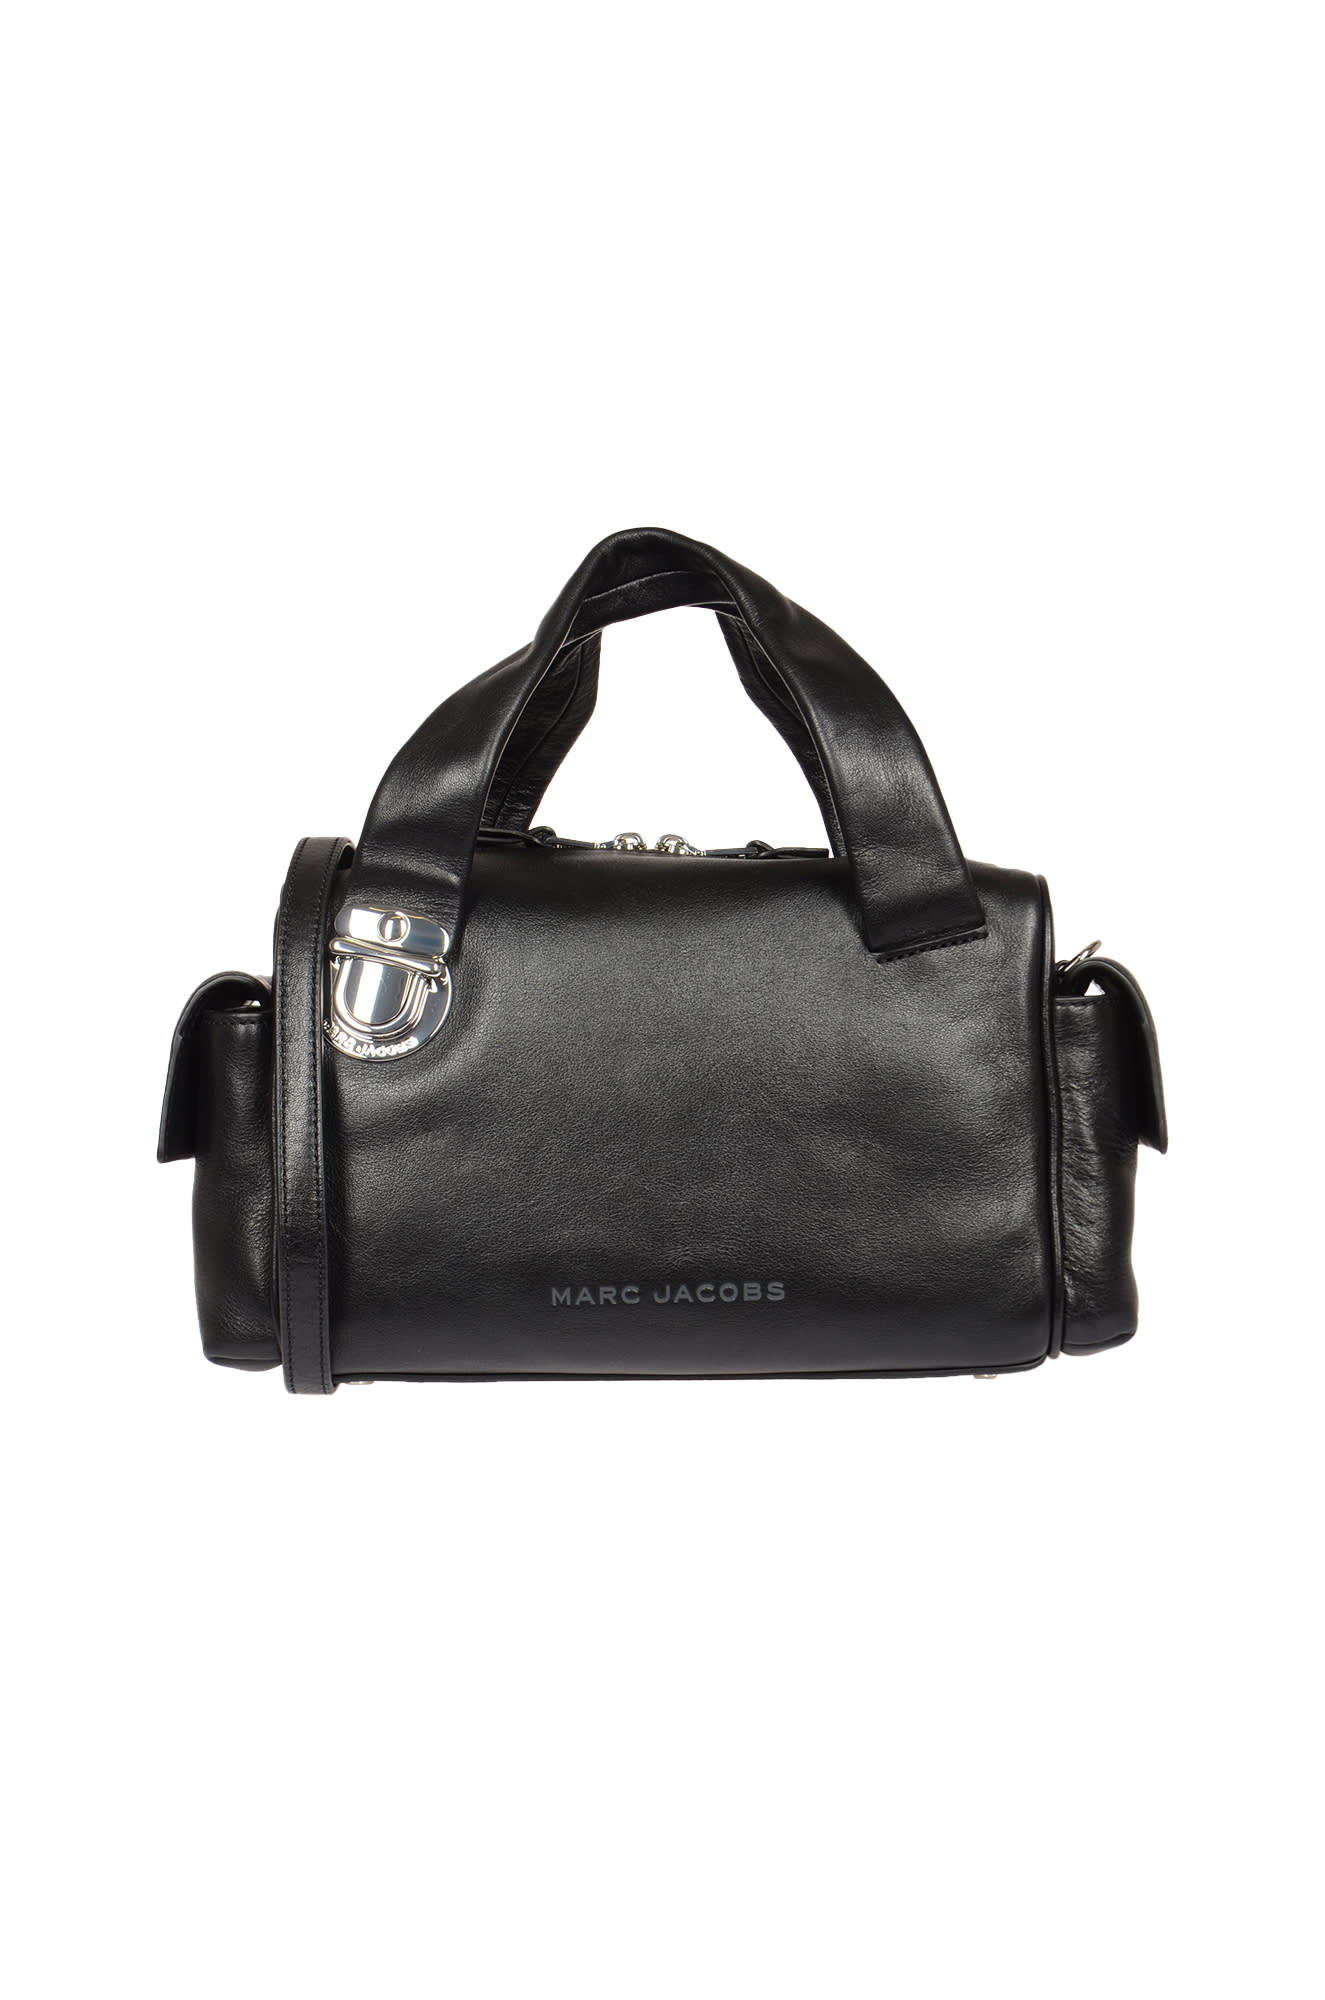 Marc Jacobs The Satchel Luggage Bag